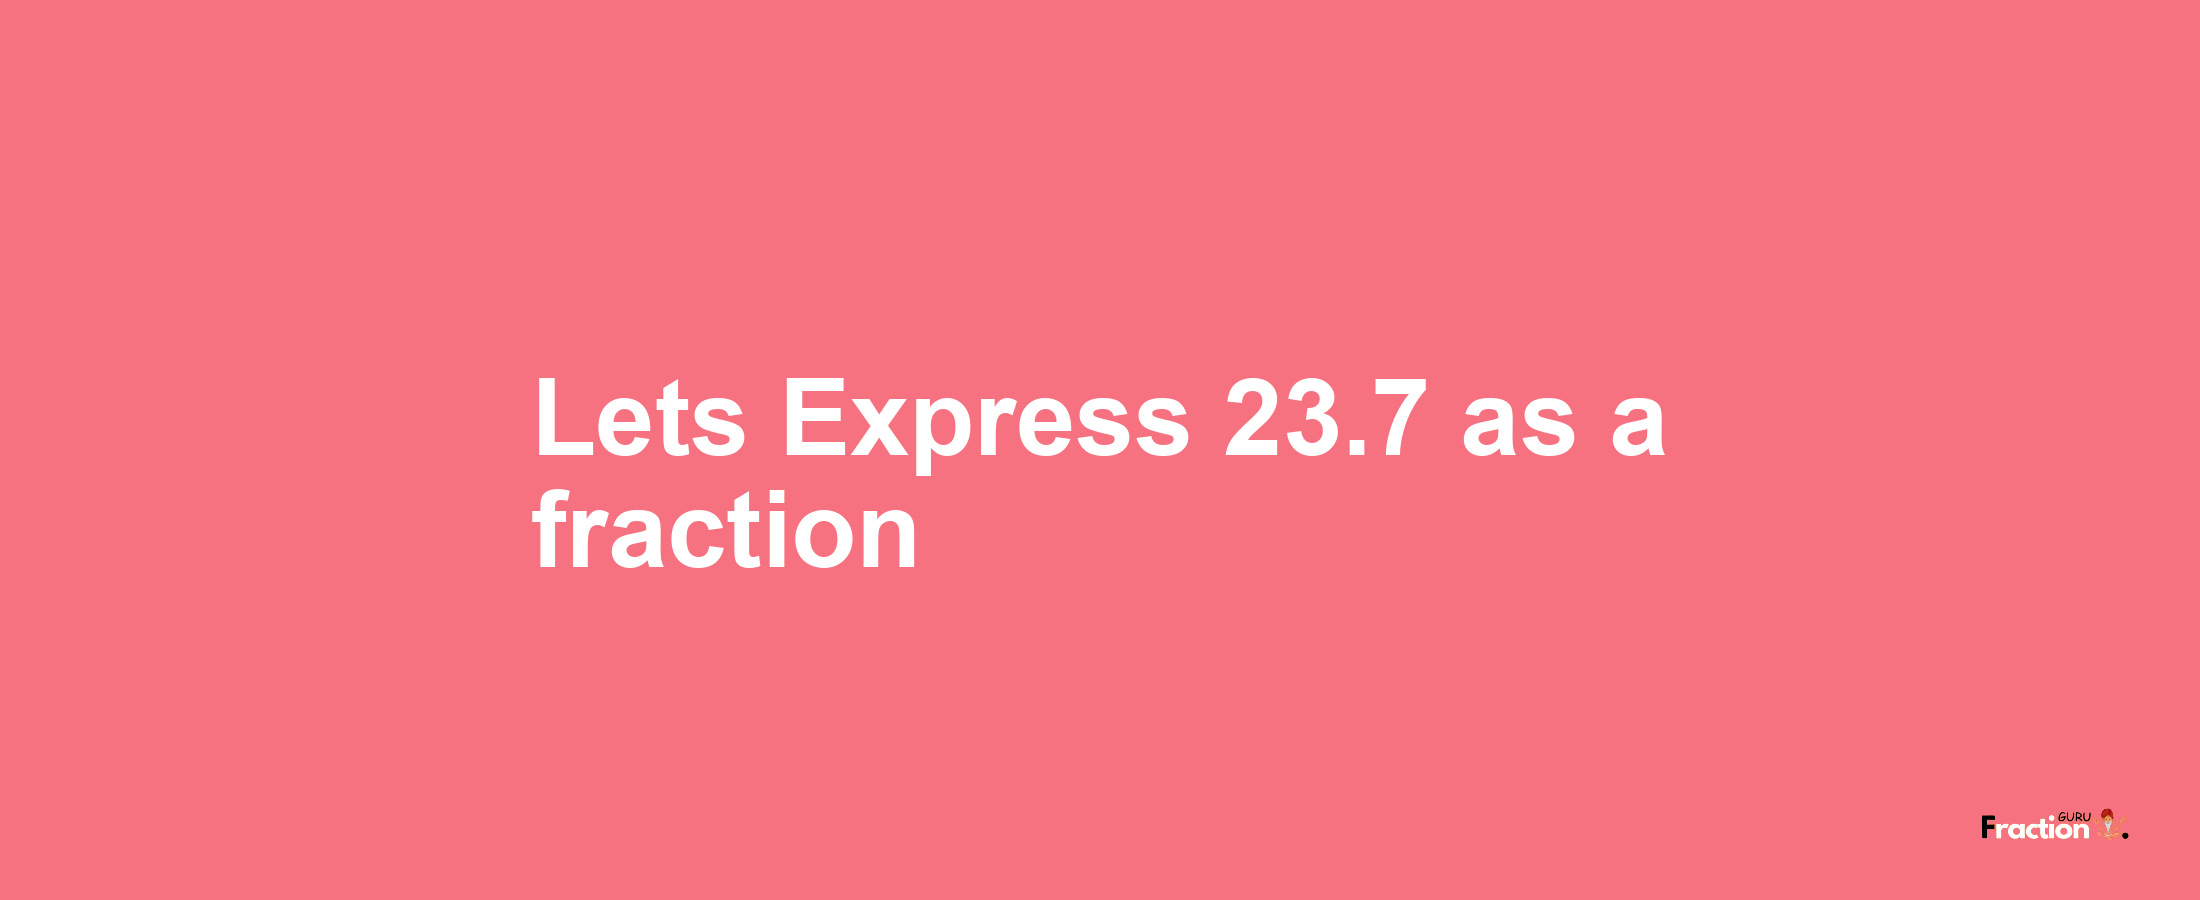 Lets Express 23.7 as afraction